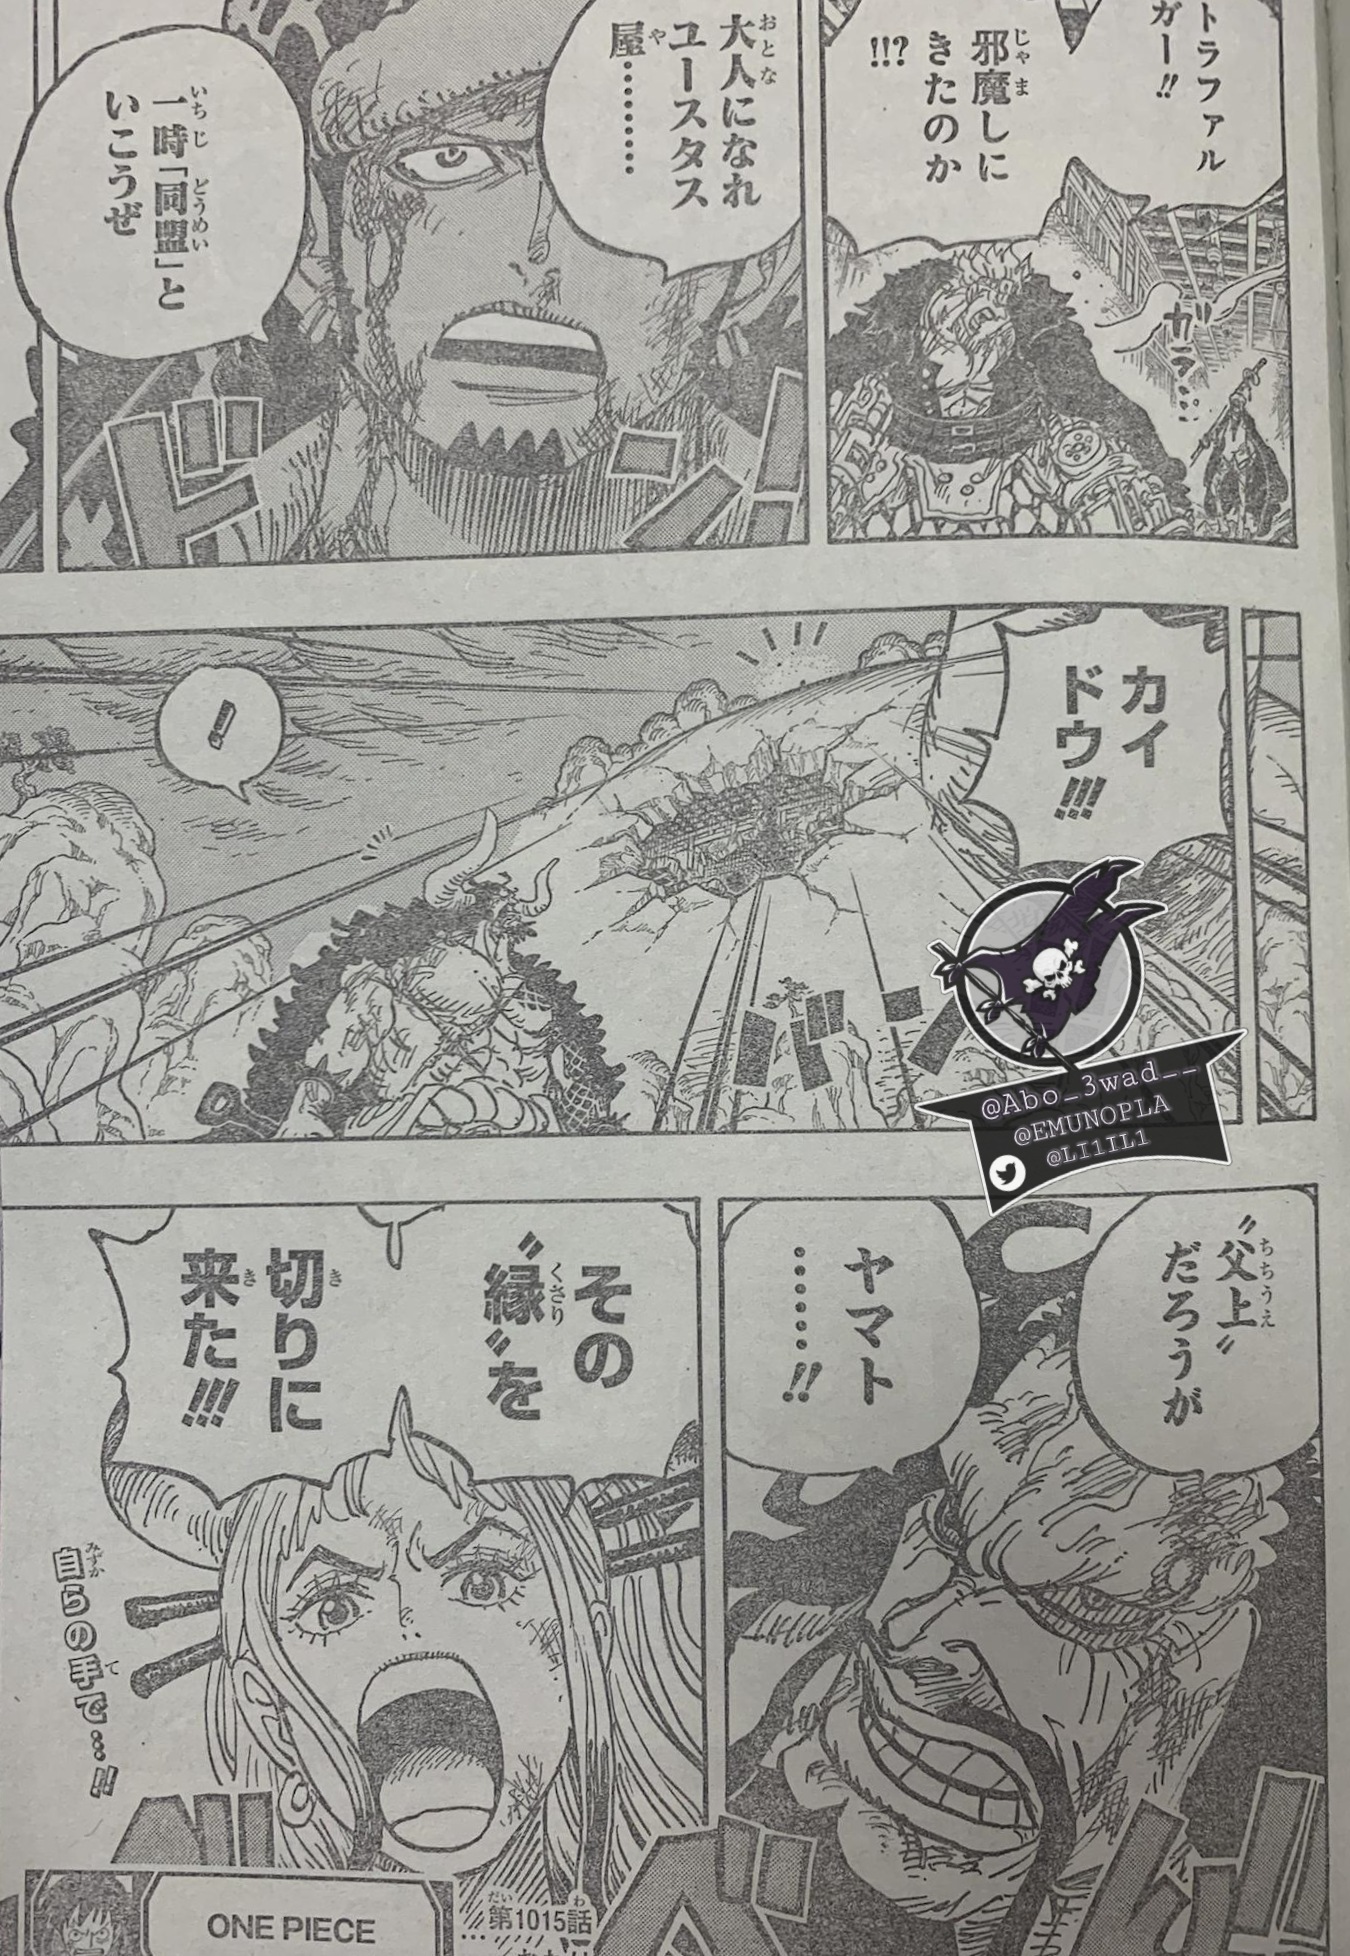 Spoiler One Piece Chapter 1015 Spoilers Images And Summaries Page 2 Worstgen